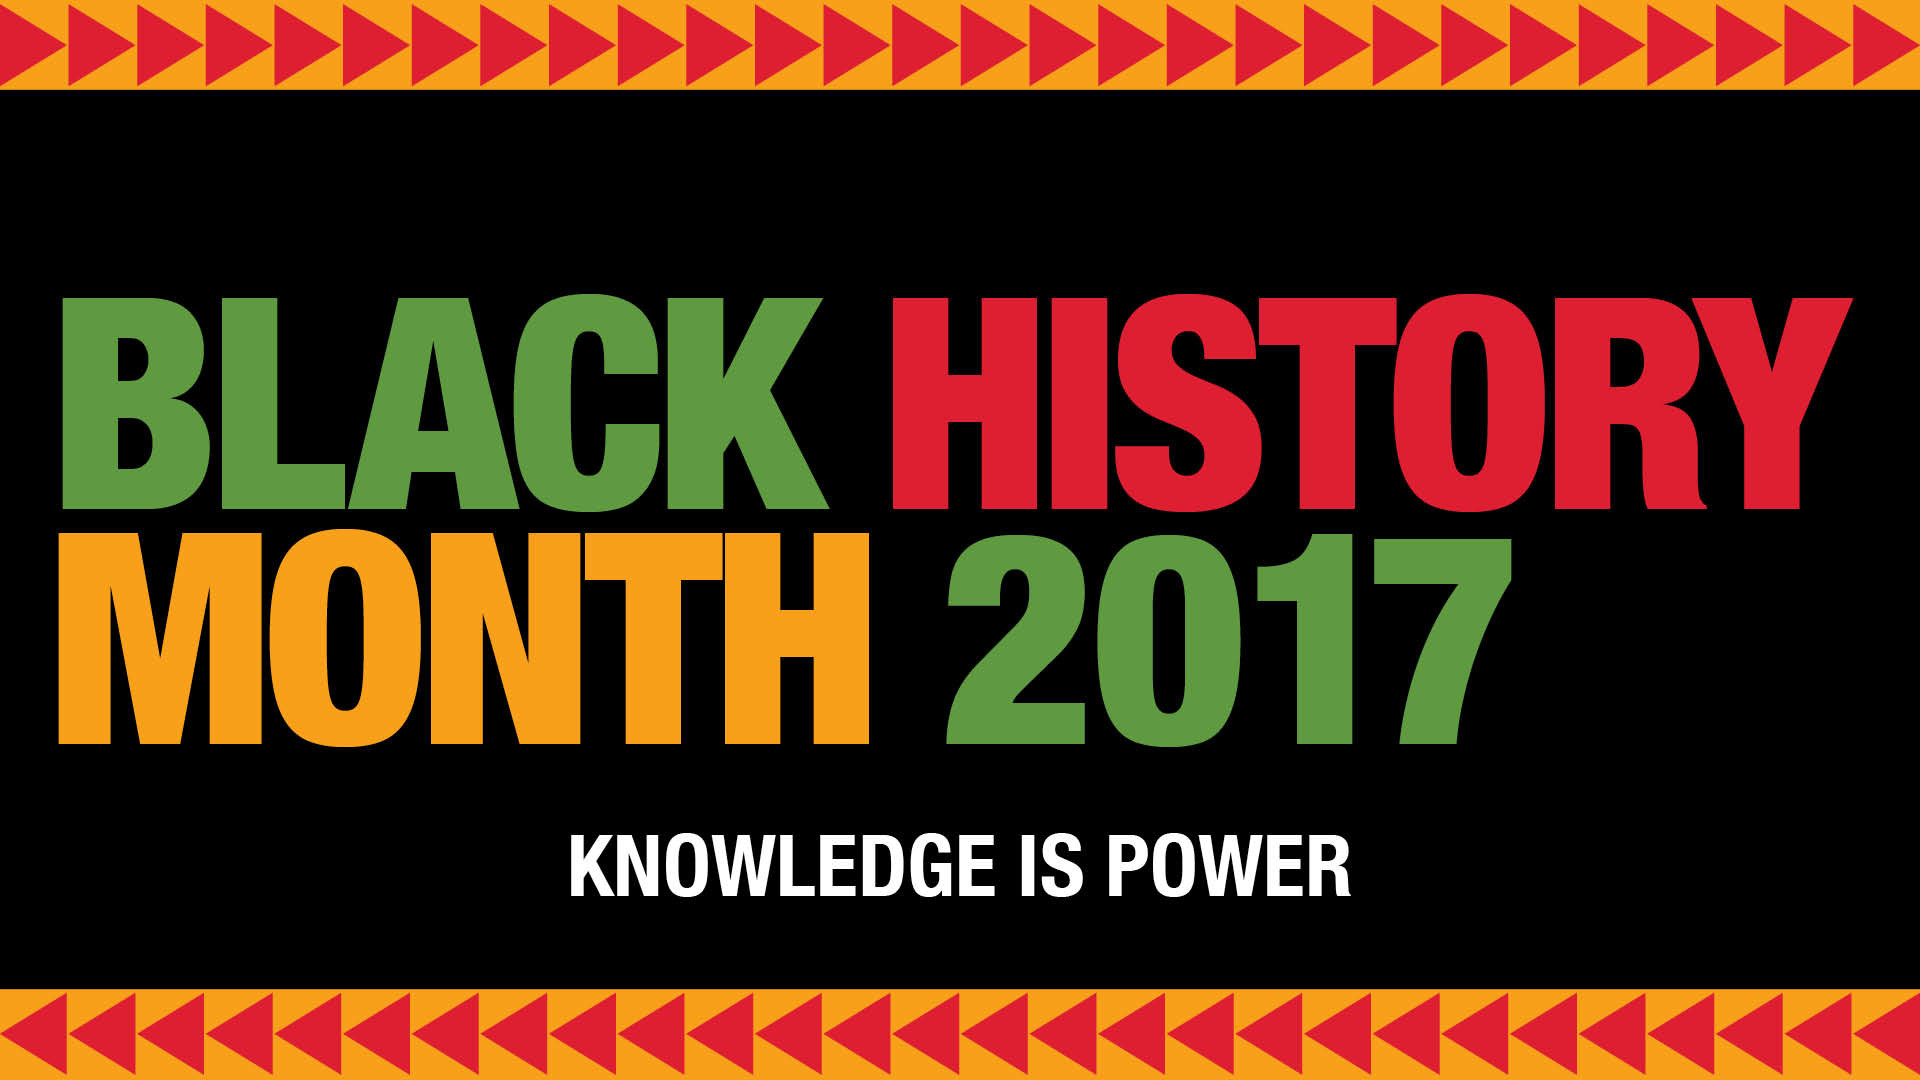 1920x1080 Black History Month events